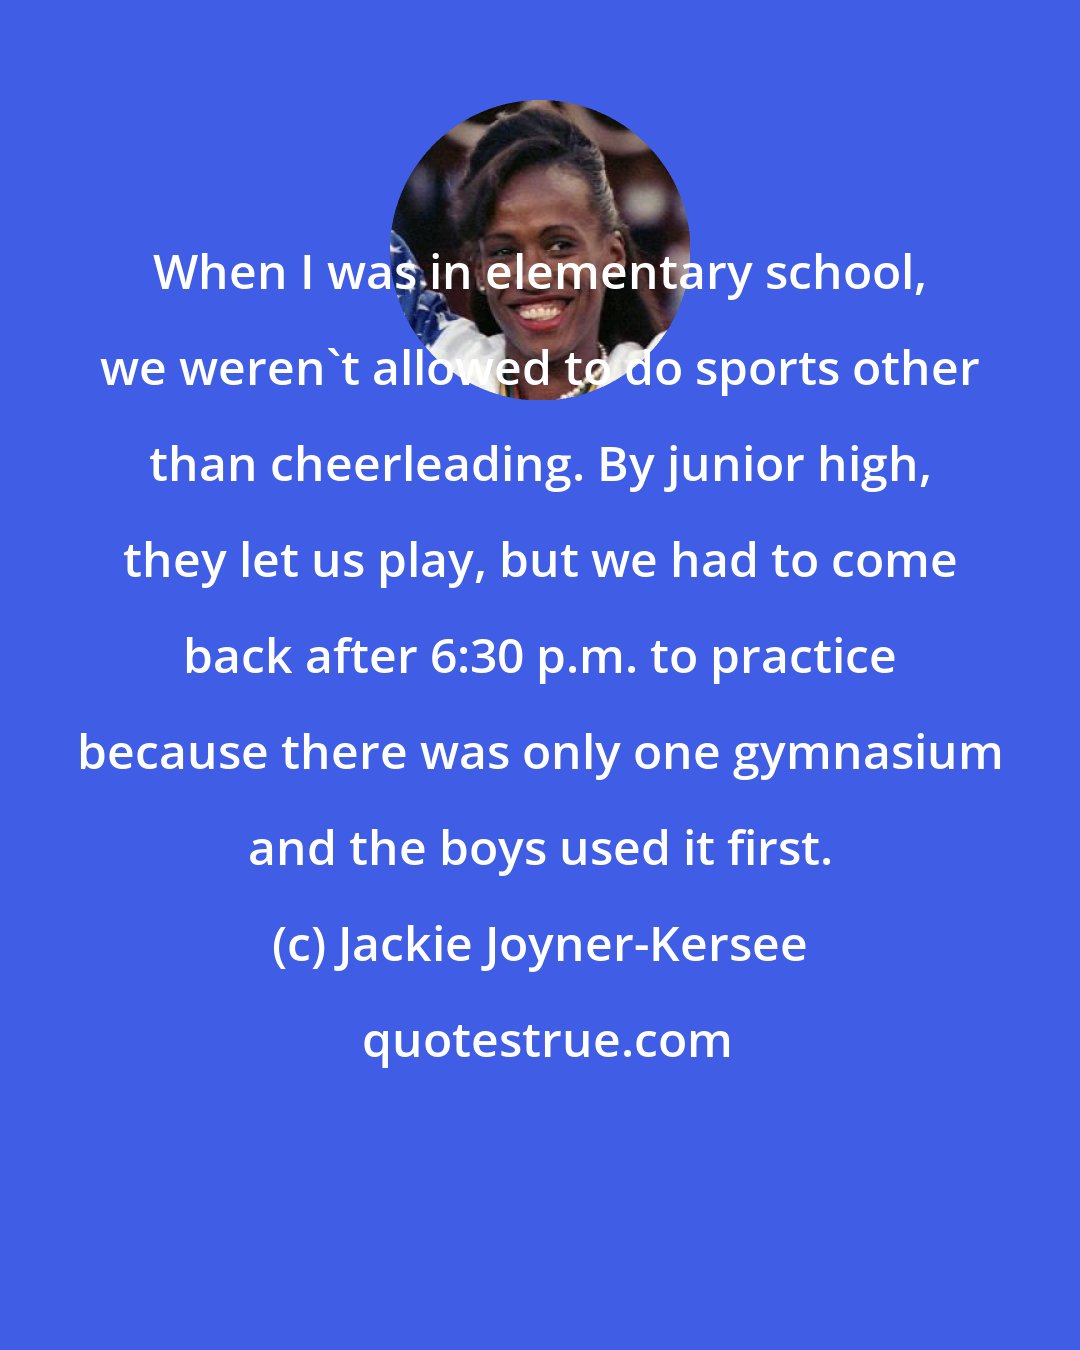 Jackie Joyner-Kersee: When I was in elementary school, we weren't allowed to do sports other than cheerleading. By junior high, they let us play, but we had to come back after 6:30 p.m. to practice because there was only one gymnasium and the boys used it first.